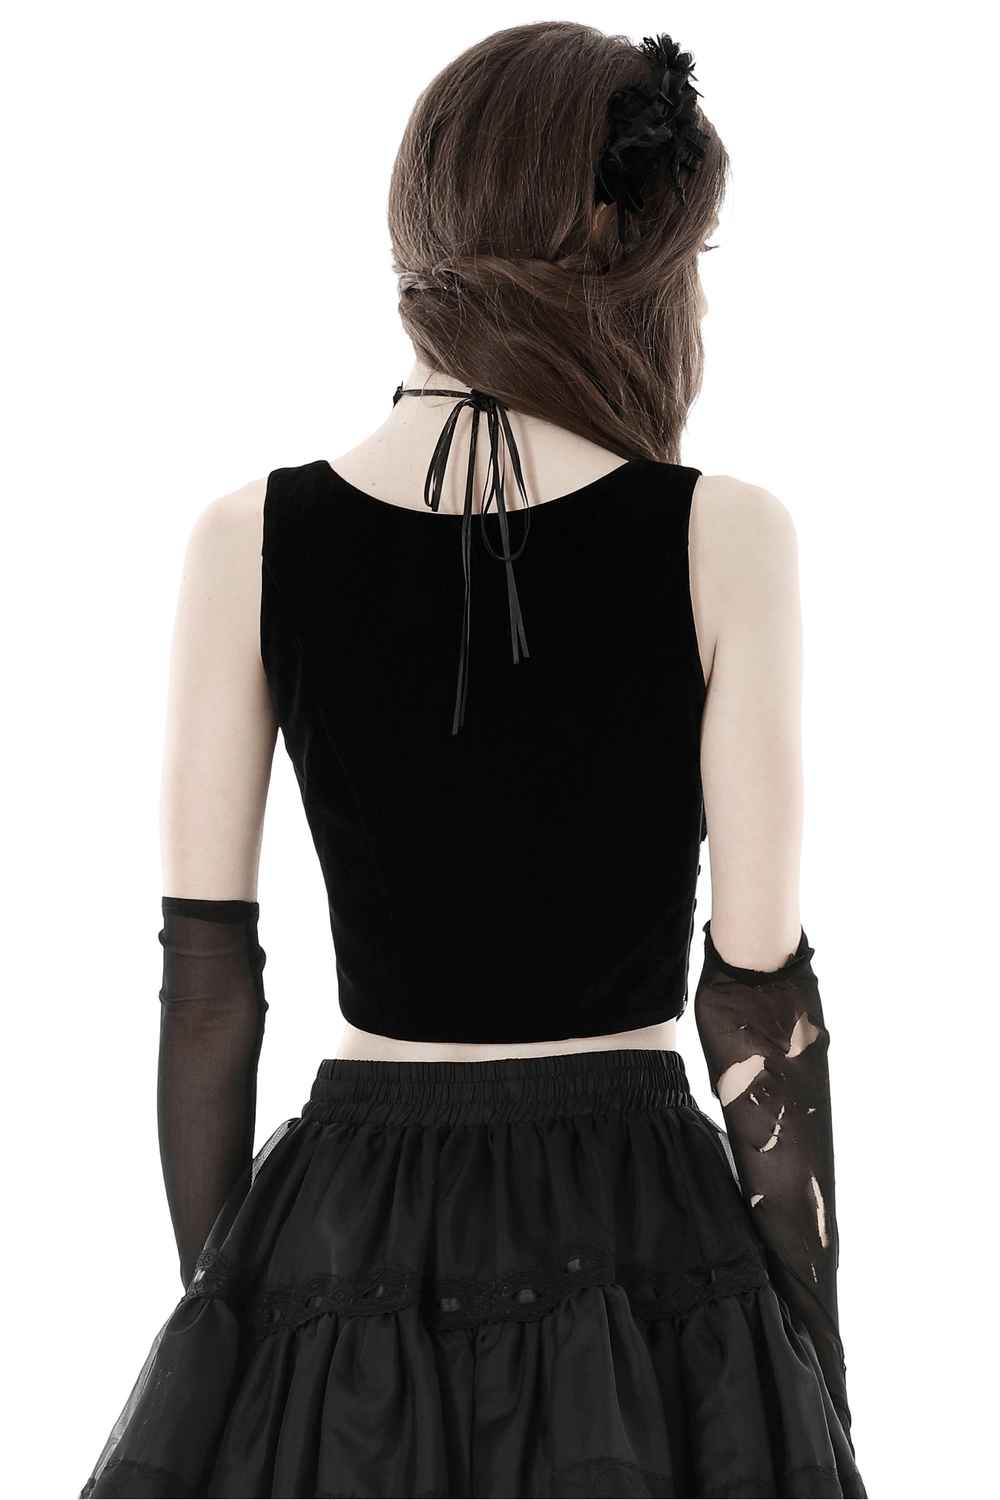 Elegant Gothic Black Corset Top with Pink Lace Accents